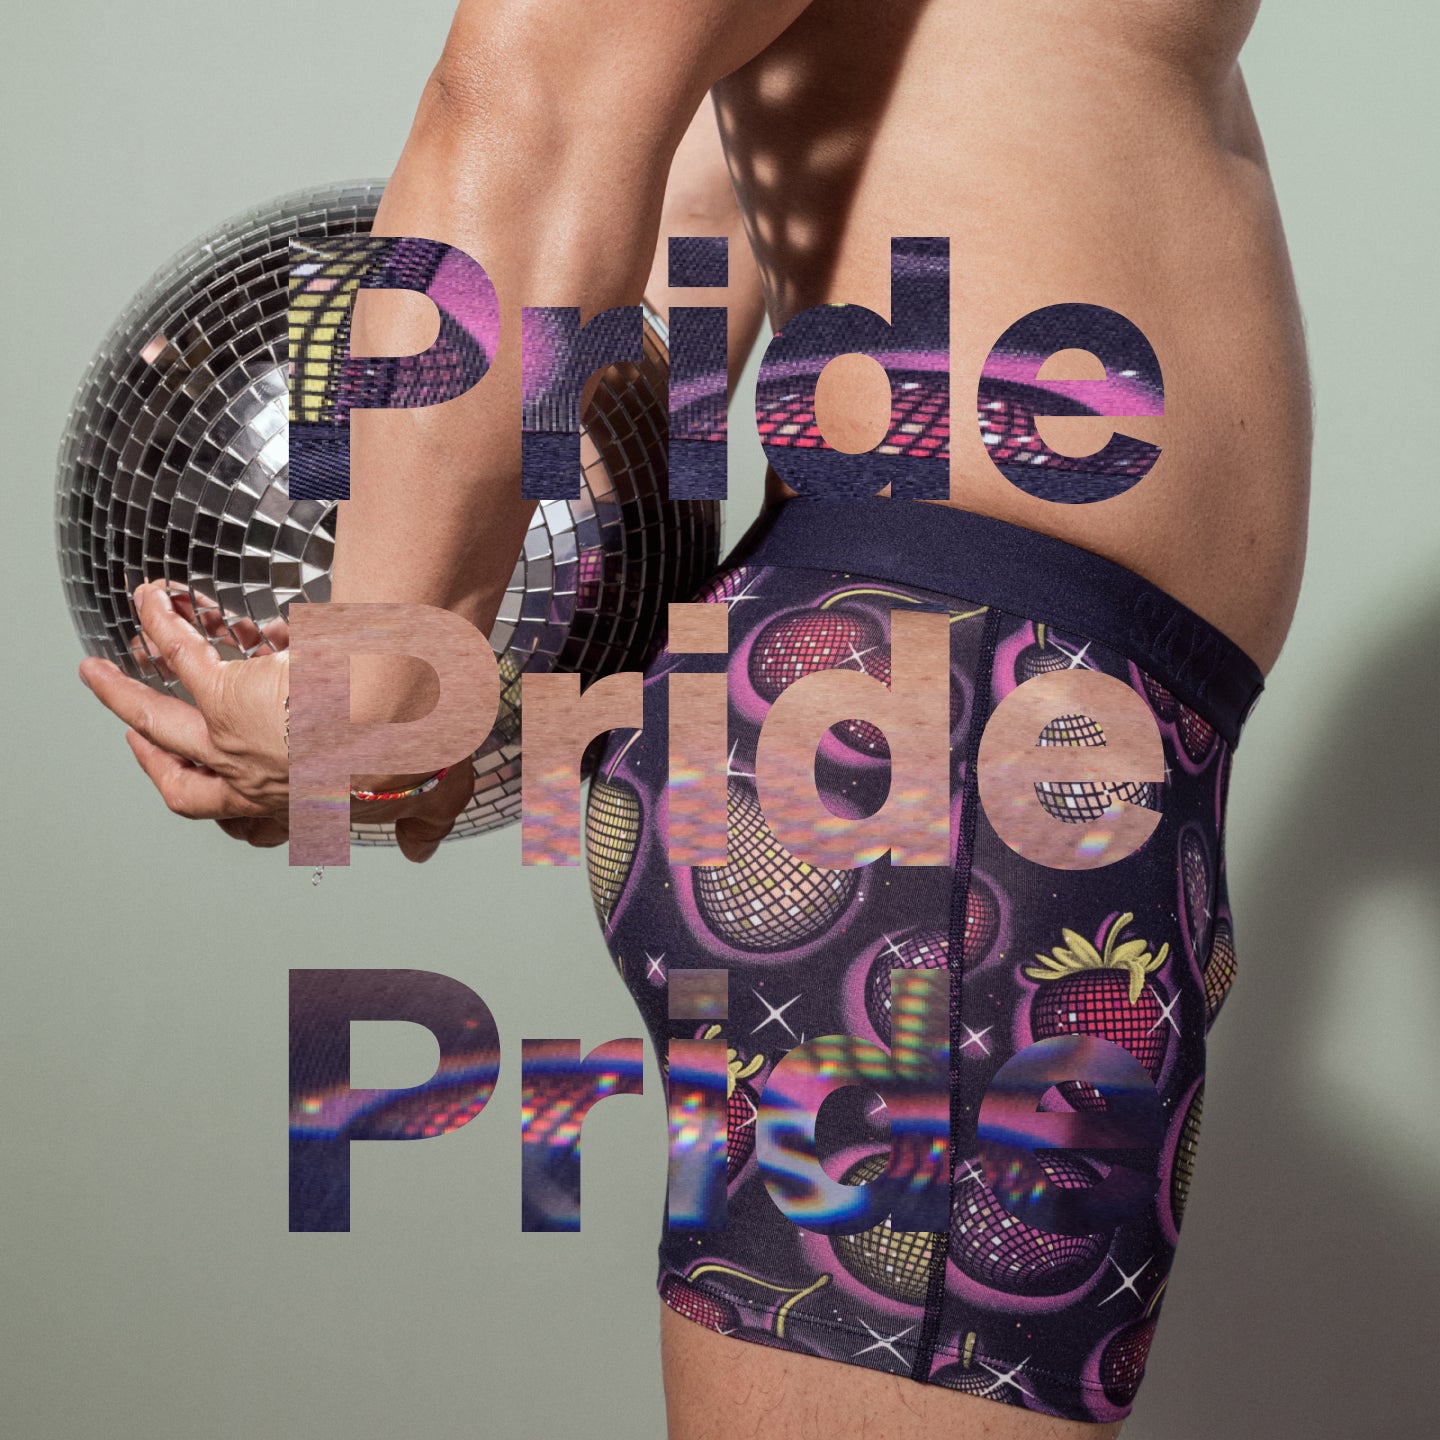 An image of a mans body wearing printed underwear with a disco ball tucked between his arm and body.